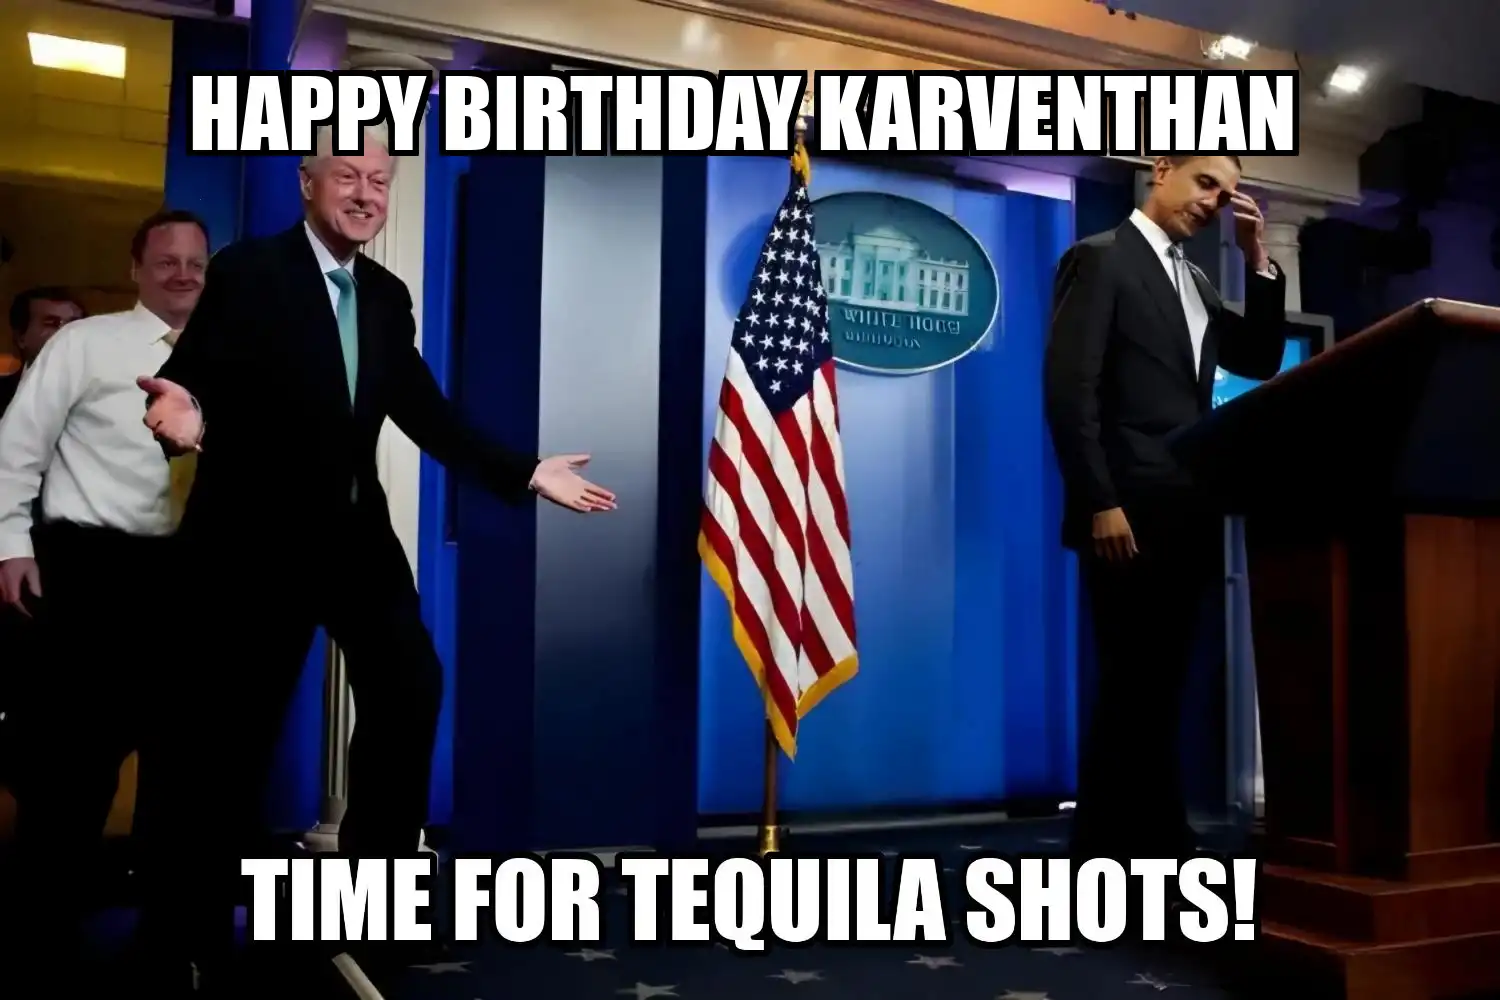 Happy Birthday Karventhan Time For Tequila Shots Memes